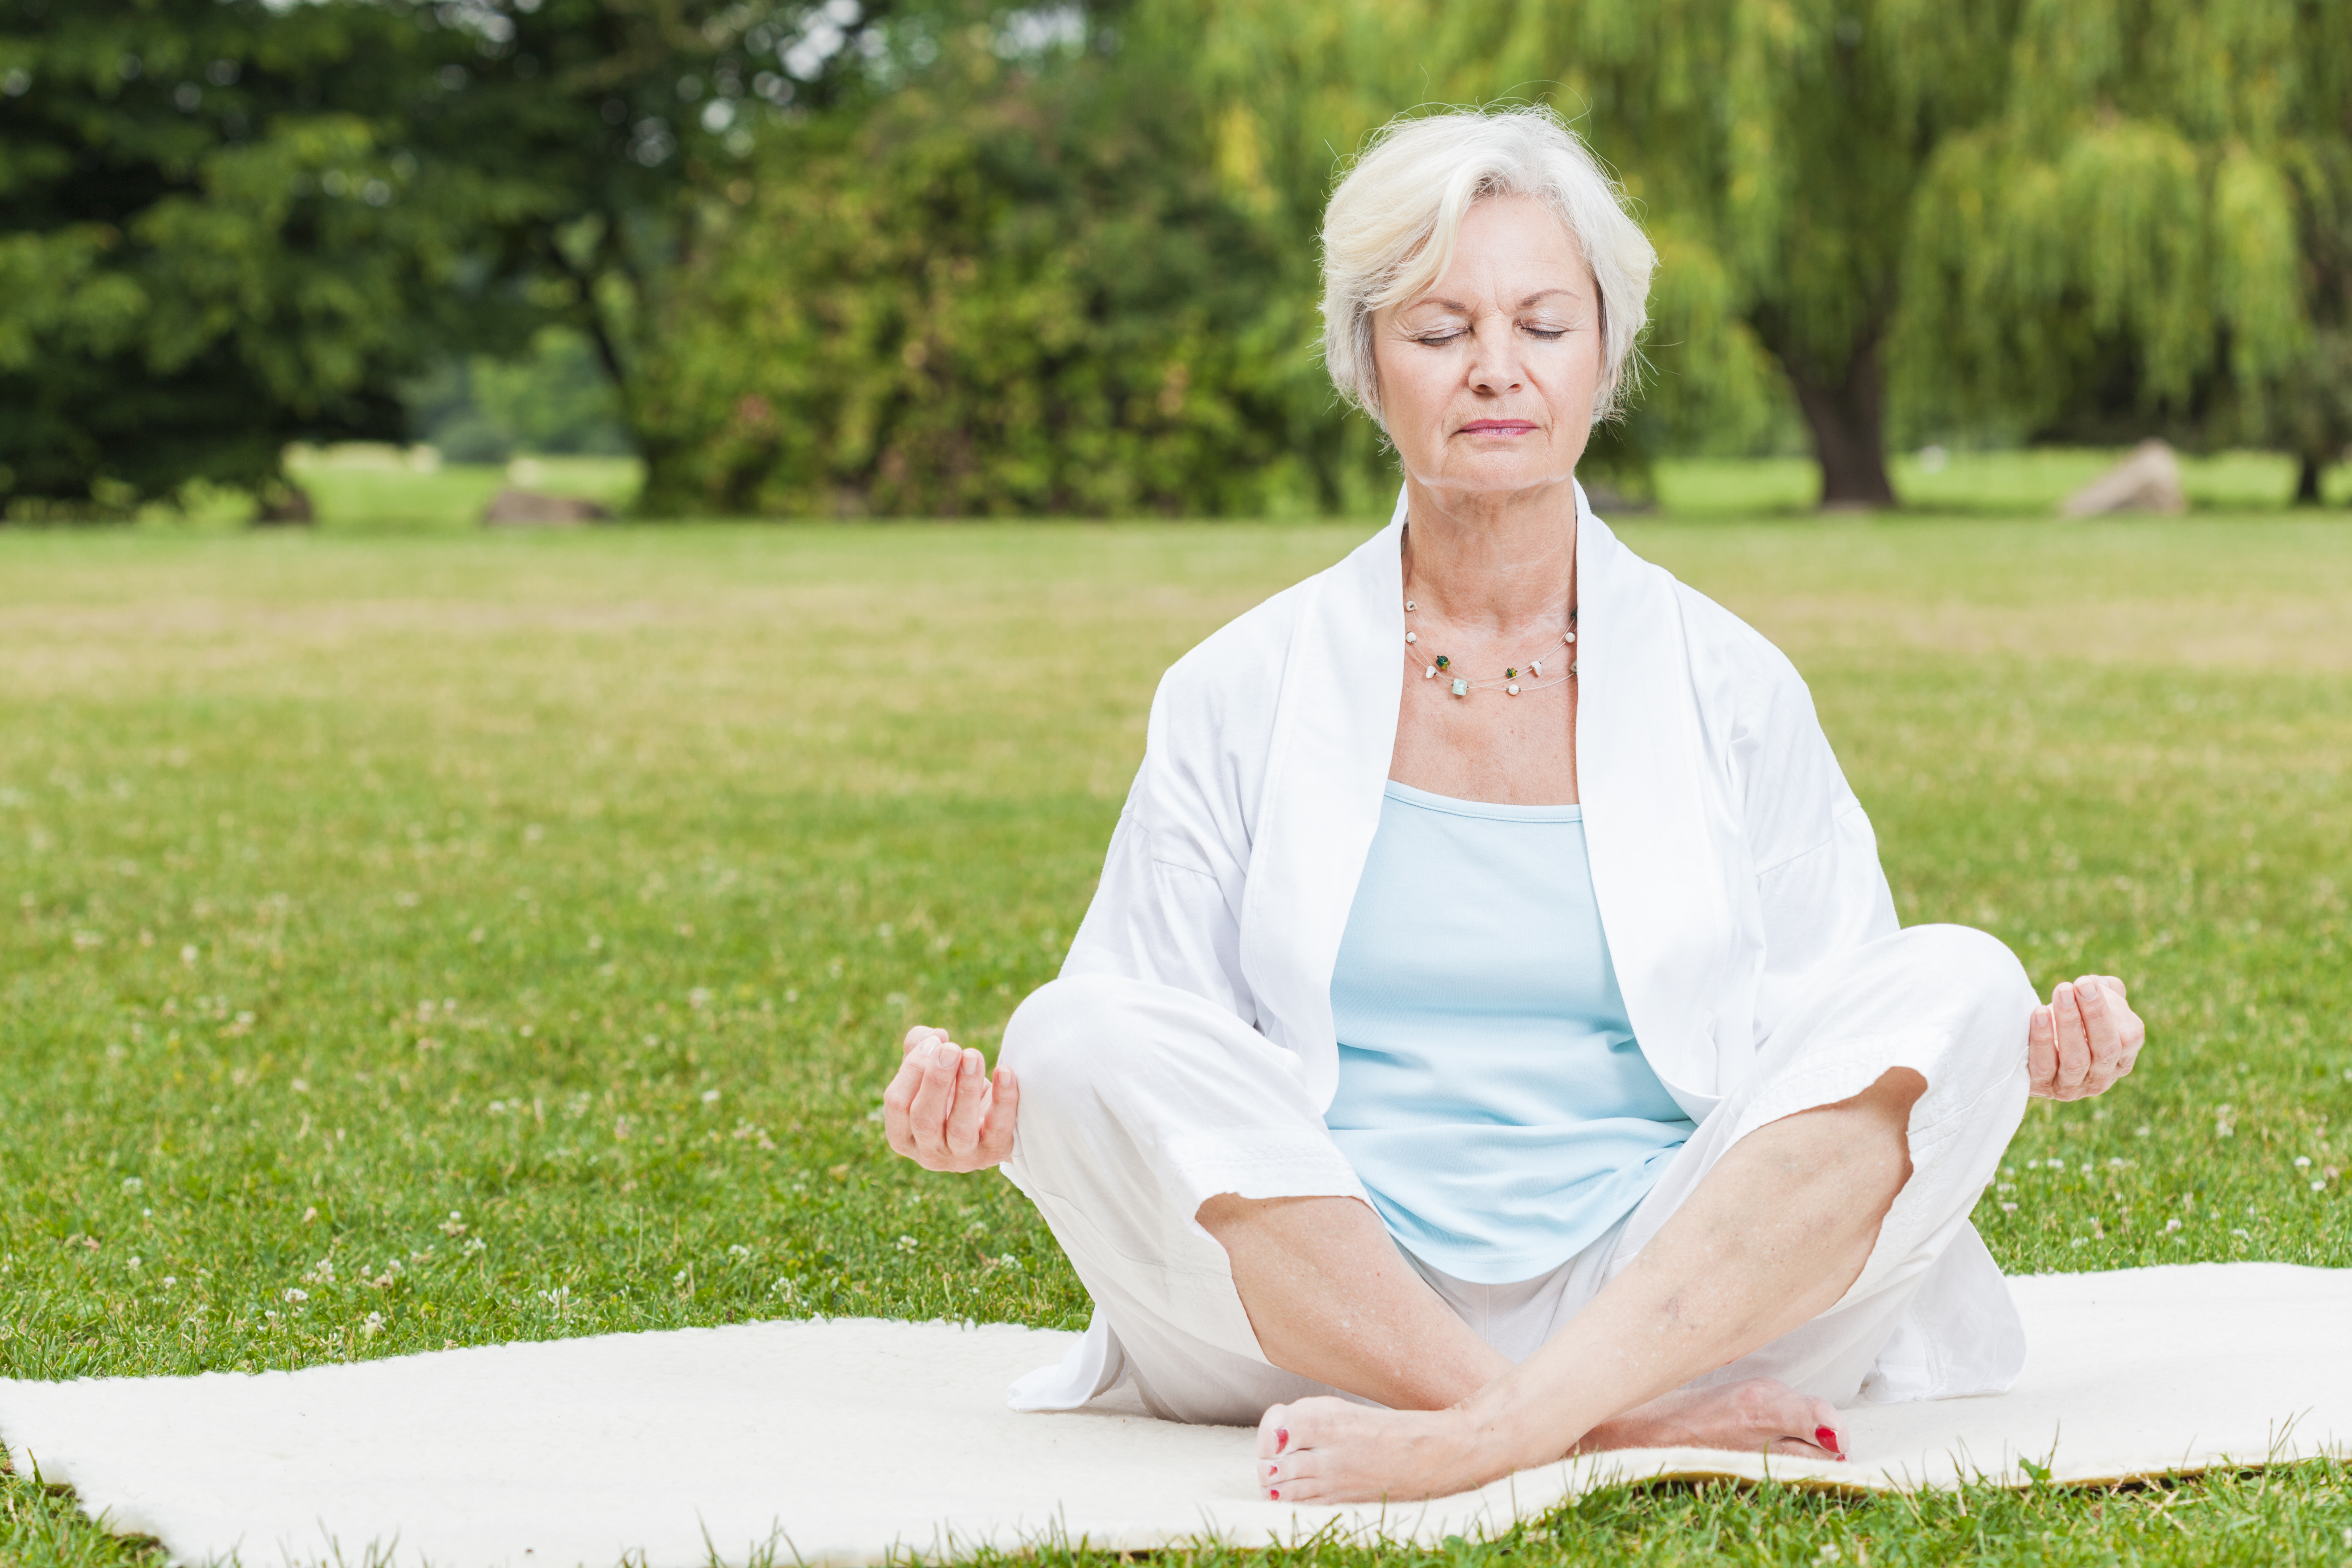 Light exercise, such as a yoga, can improve memory and mood for women experiencing menopause or post-menopausal symptoms.